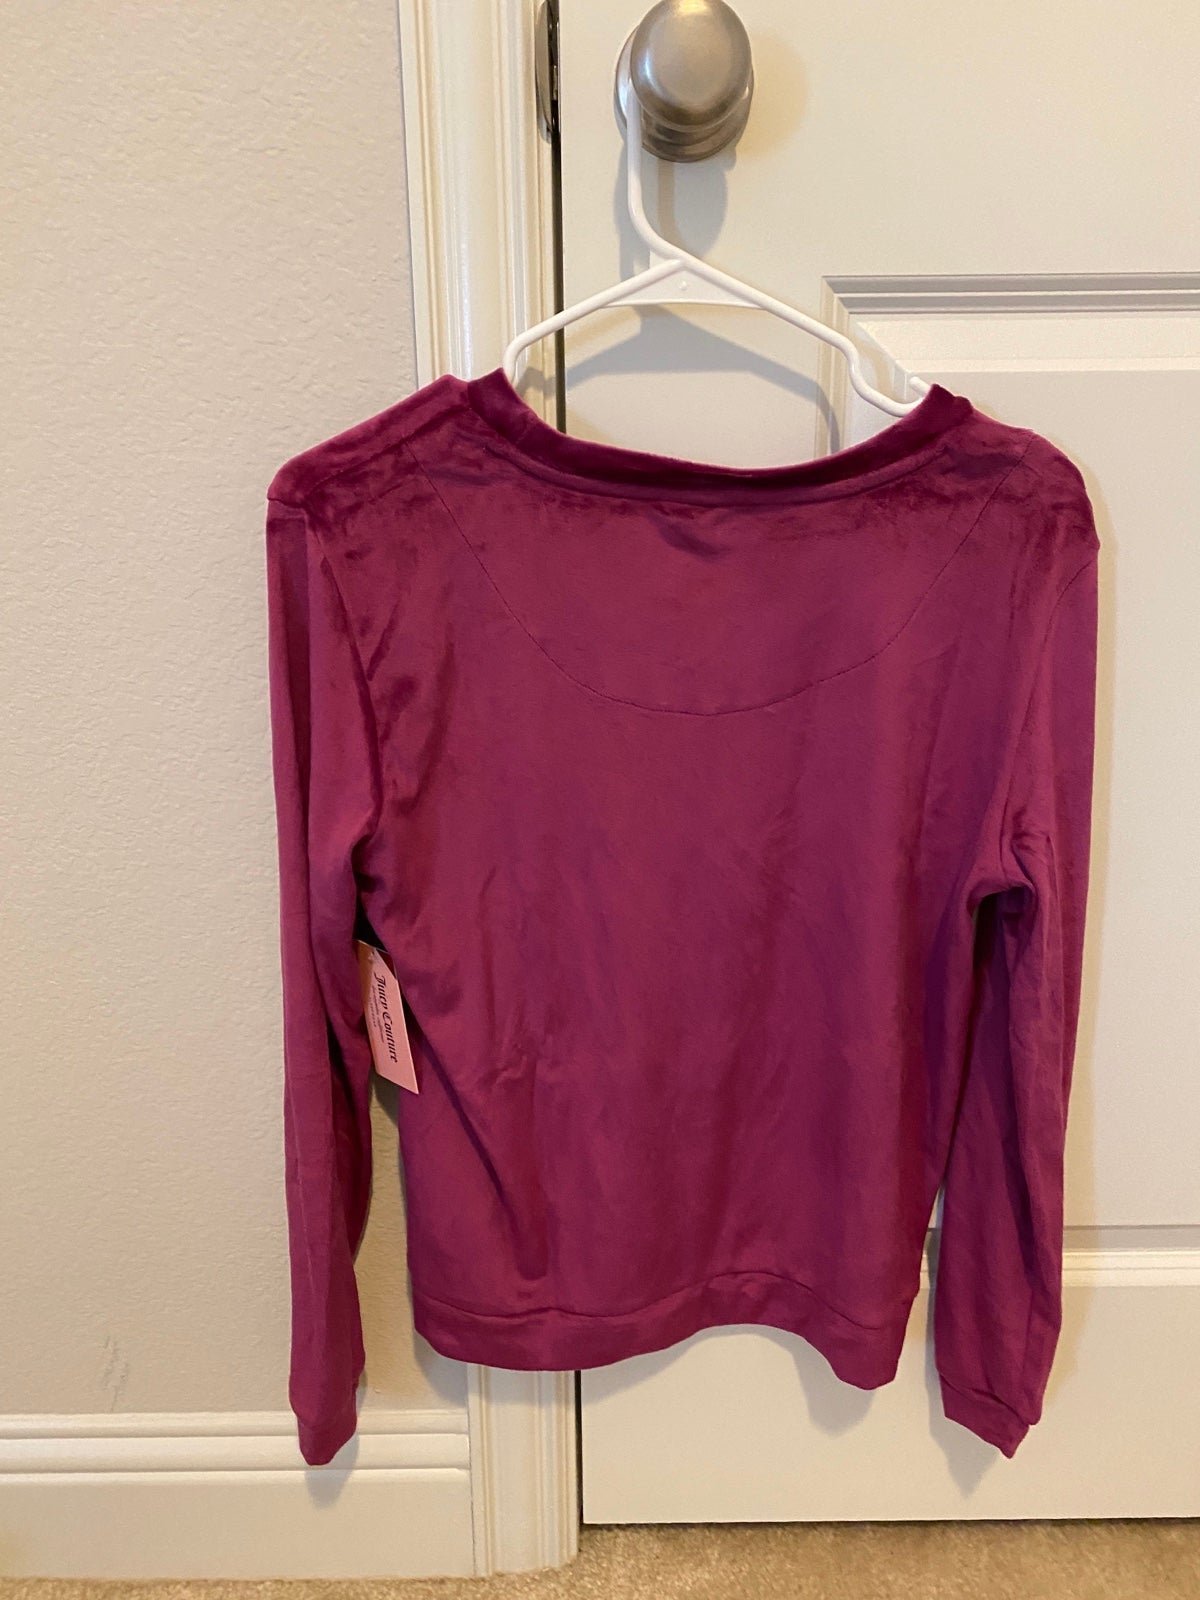 Great Juicy Couture Bling Velour Hoodie Track Top & Pants Size S iQsDs07vS all for you